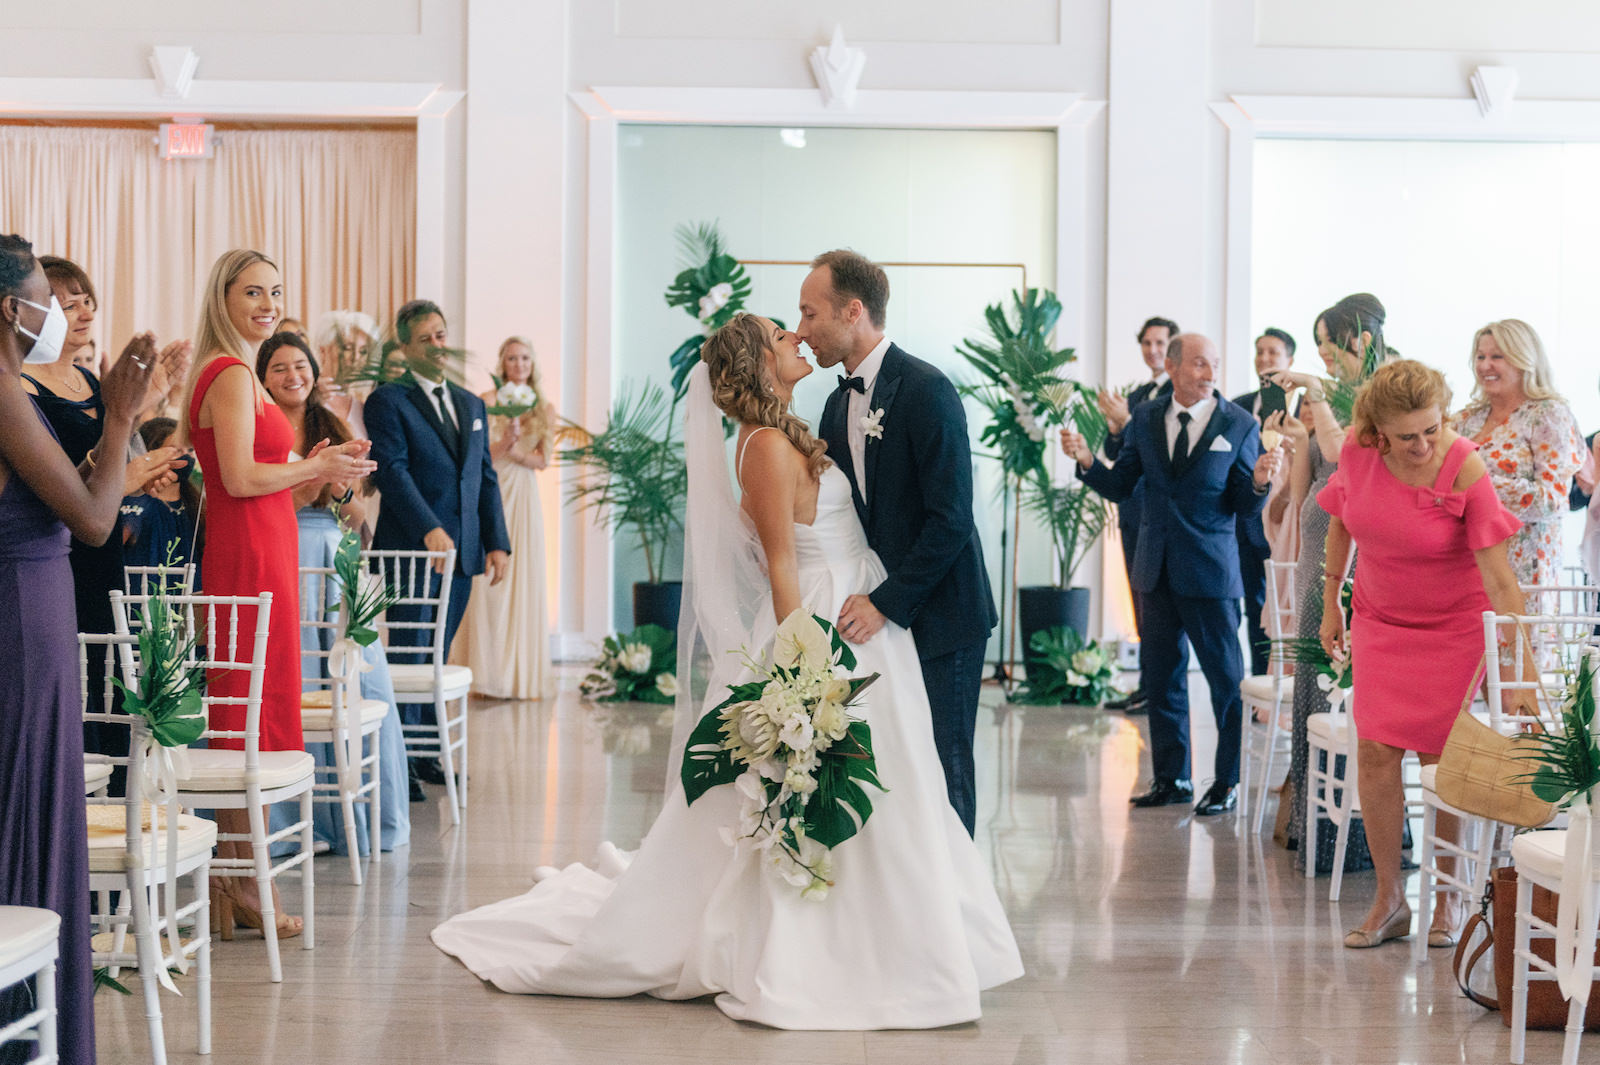 White and Green Modern Minimalist Tropicl Wedding Ceremony, Bride and Groom Kissing After Exchanging Vows Holding Lush Monstera Palm Leaves, White King Protea, Orchids, Anthurium Floral Bouquet | Tampa Bay Wedding Planner Taylored Affairs | Downtown Tampa Historic Wedding Venue The Vault